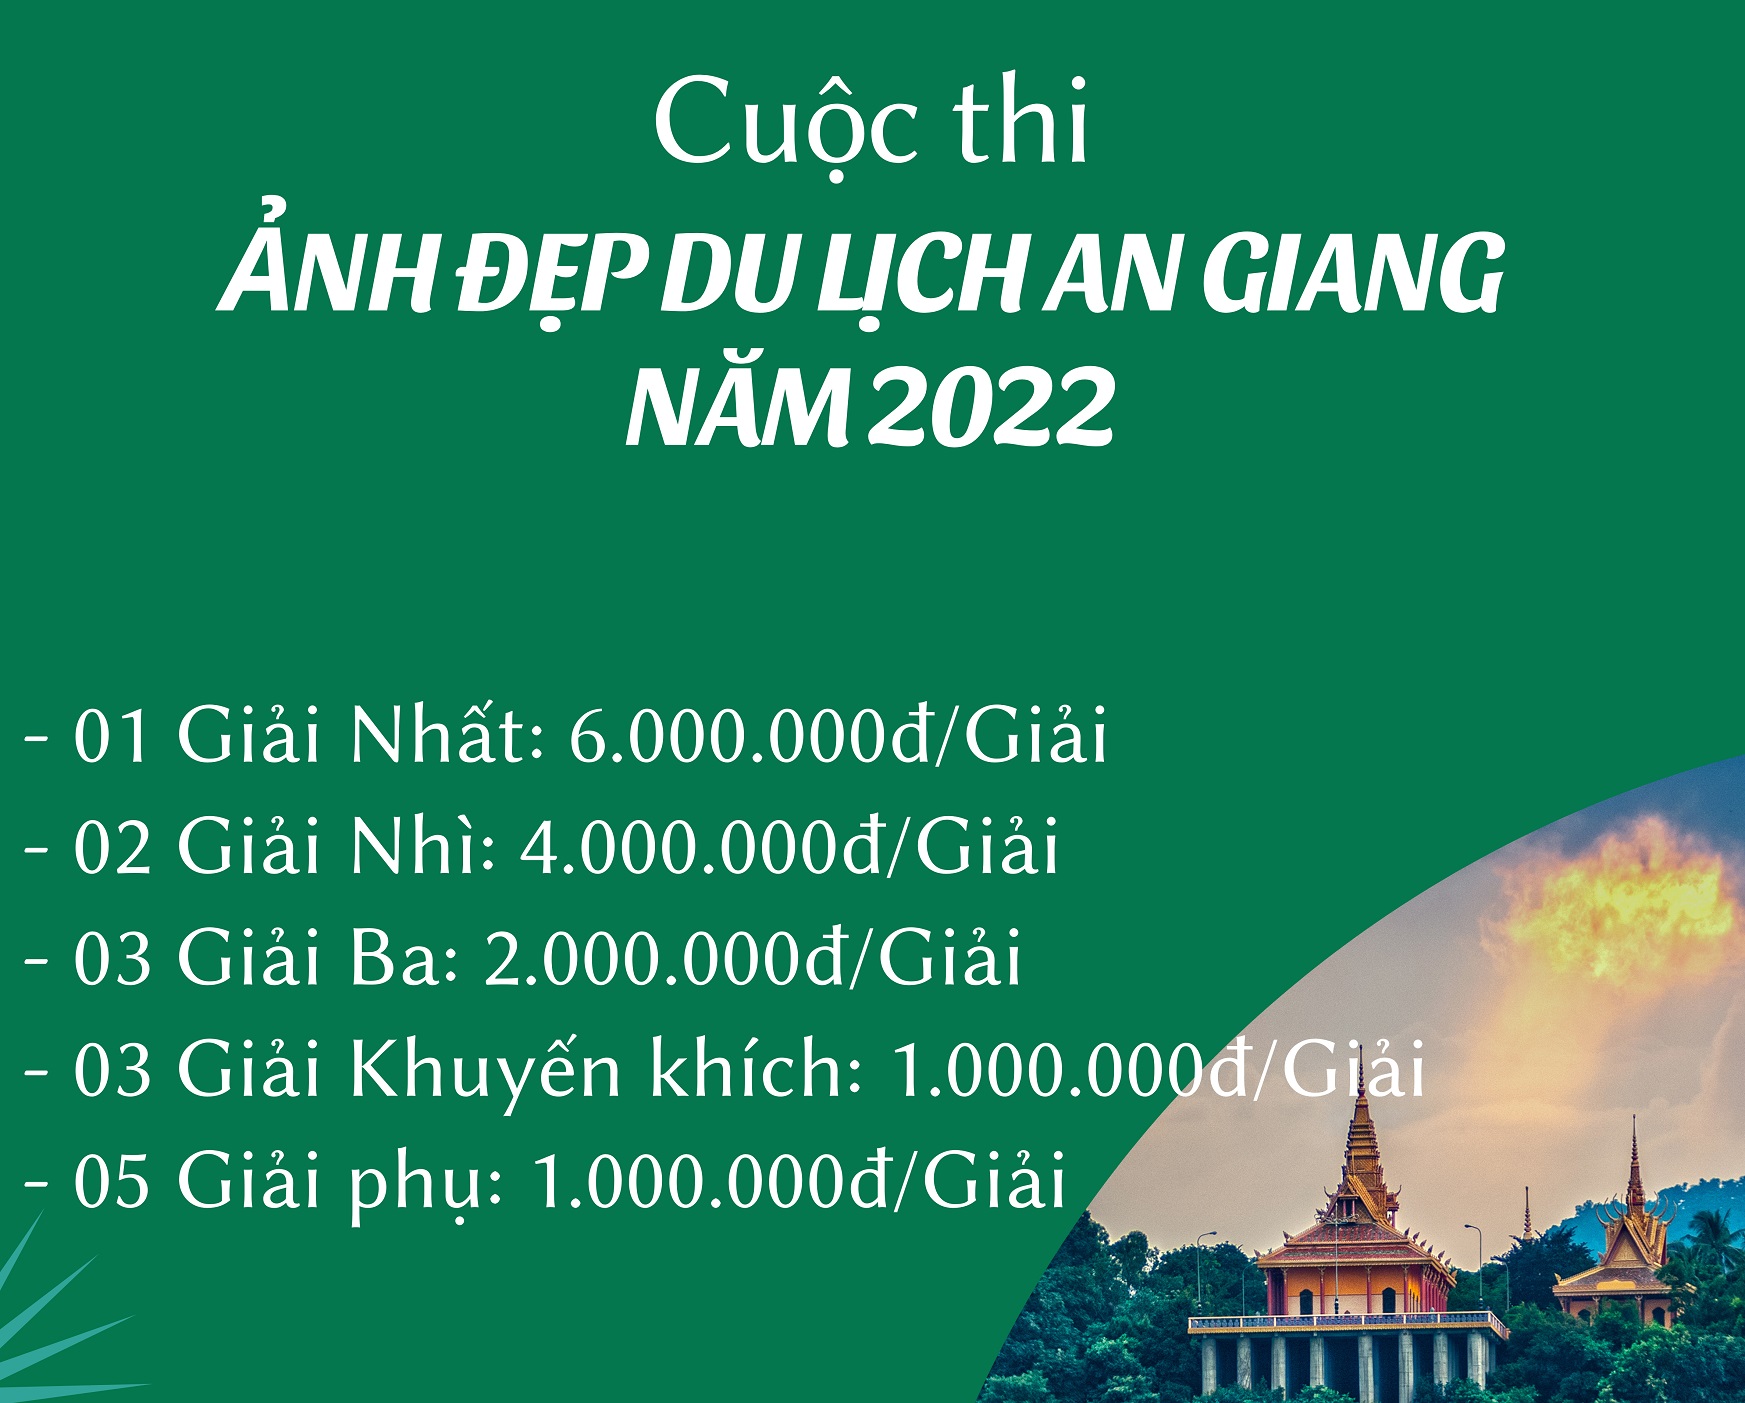 An Giang tourism beautiful photo contest in 2022